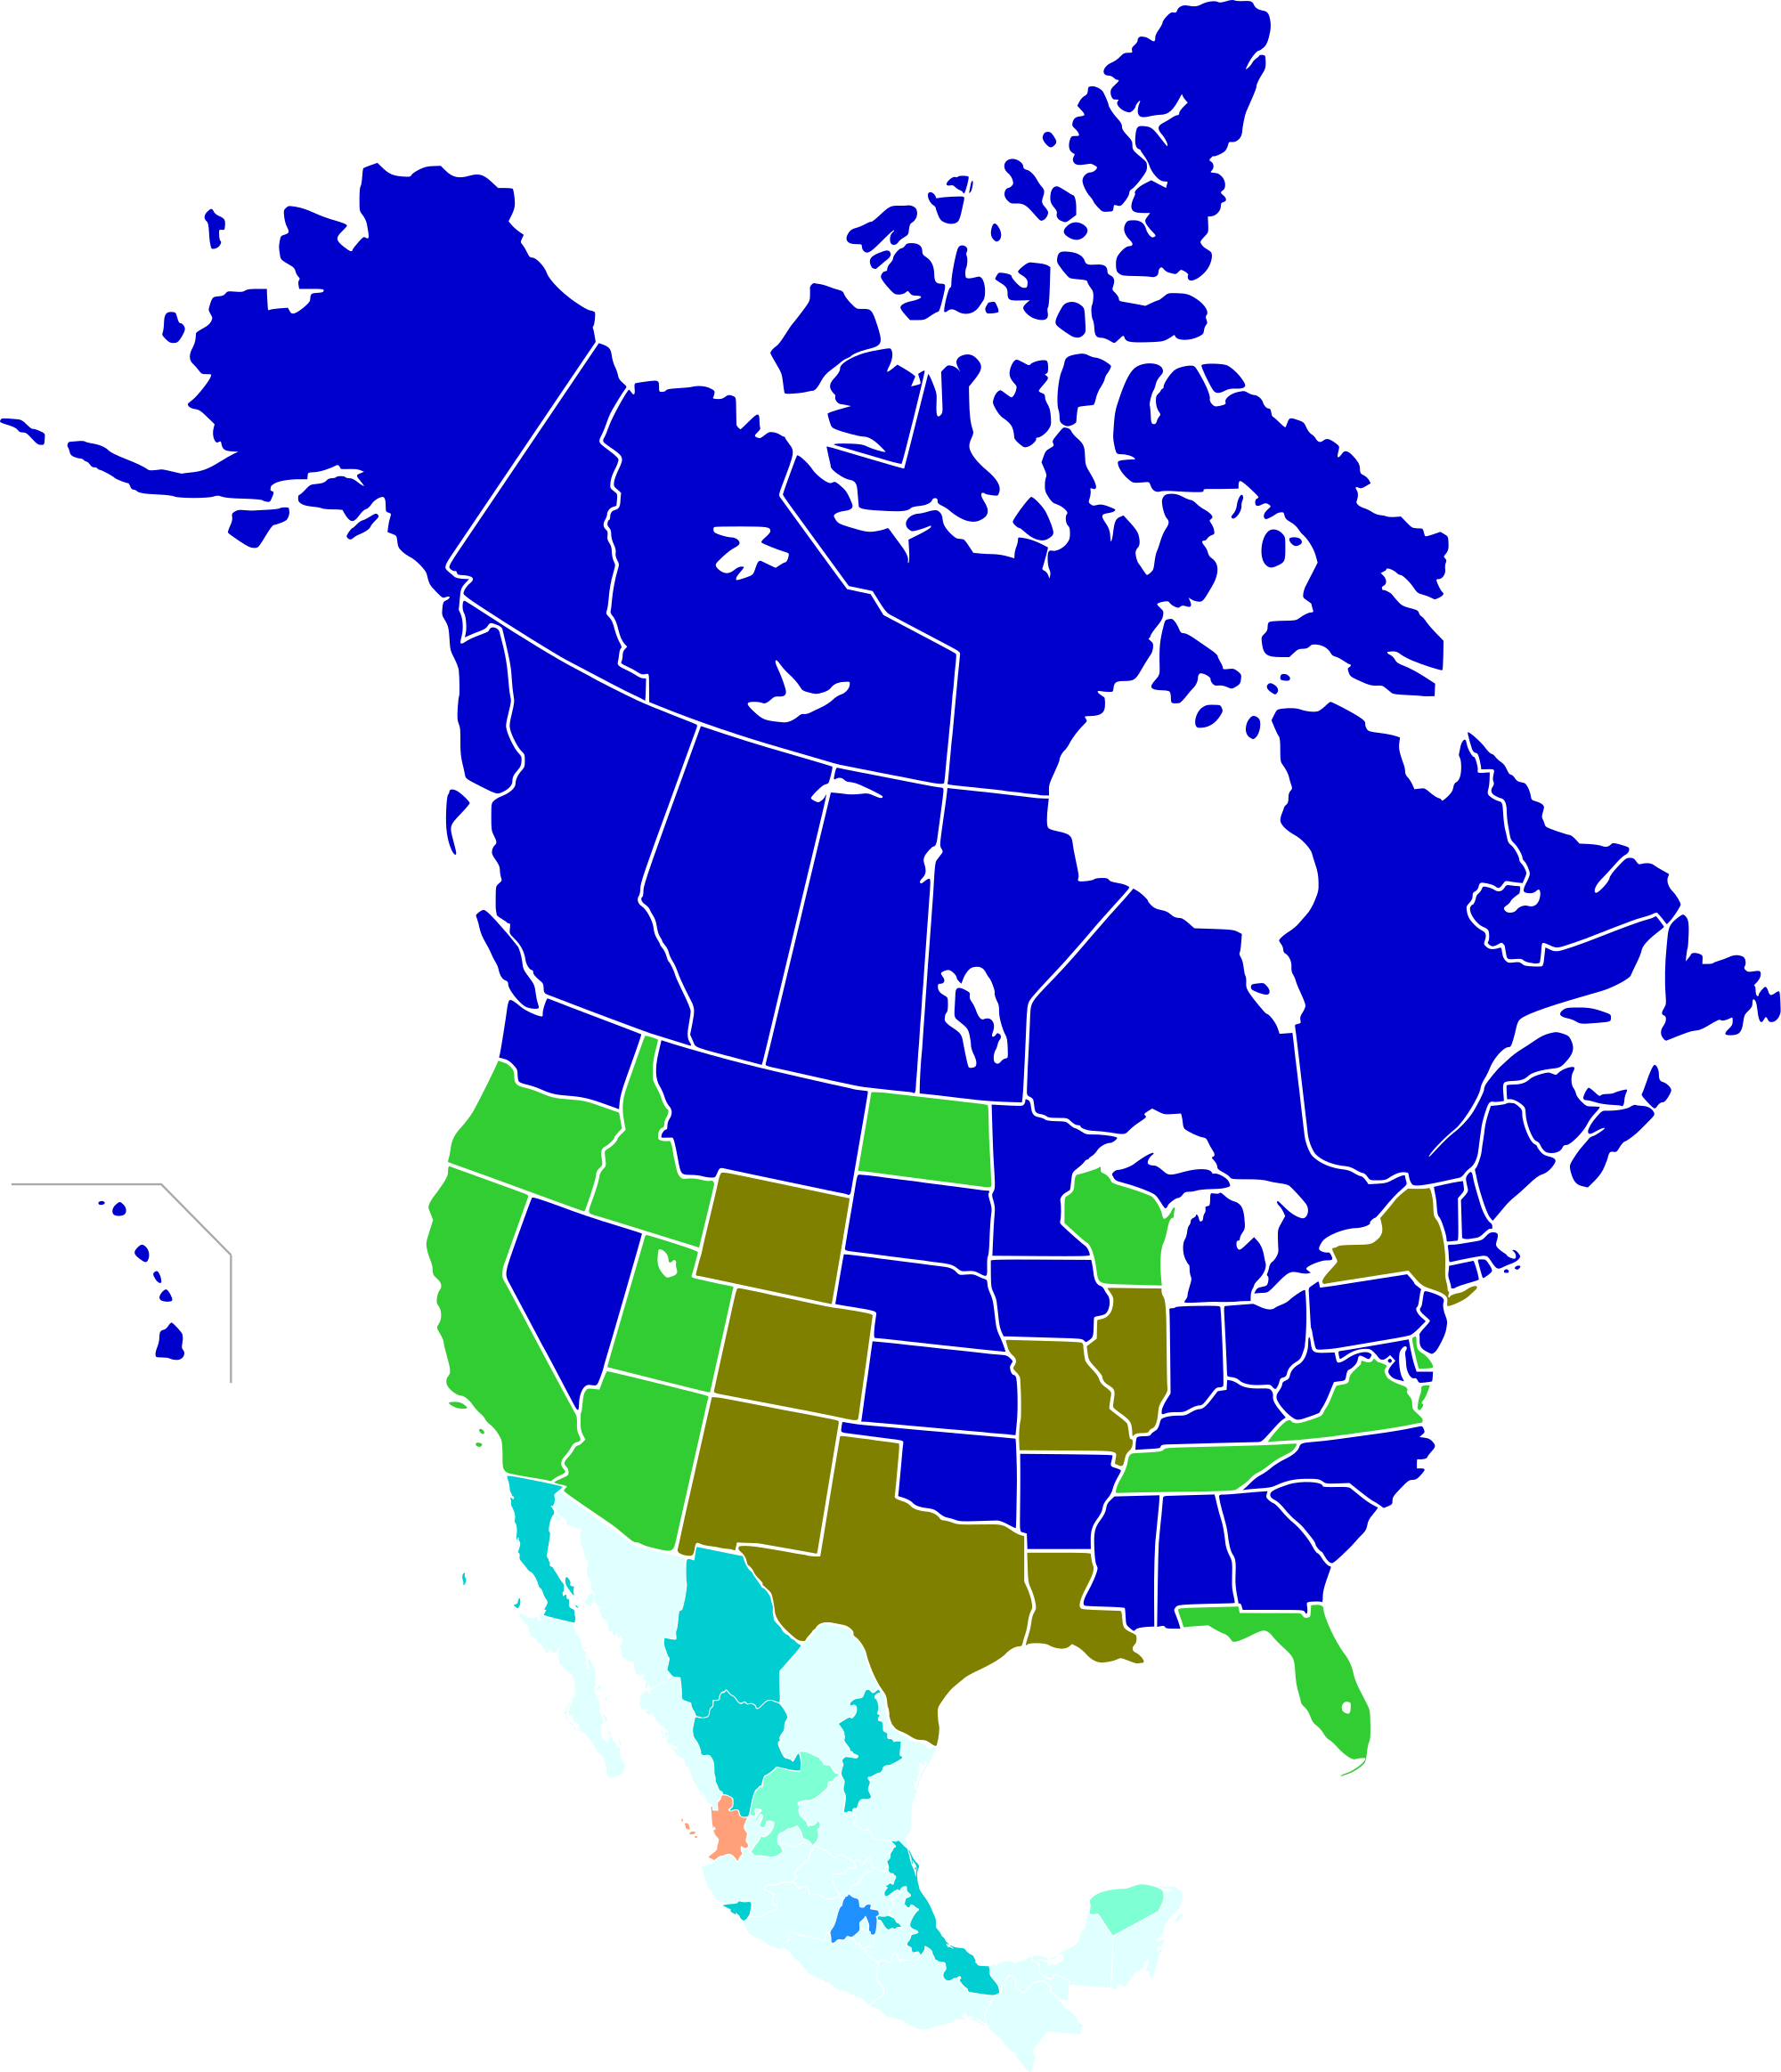 ages of consent in north america wikipedia